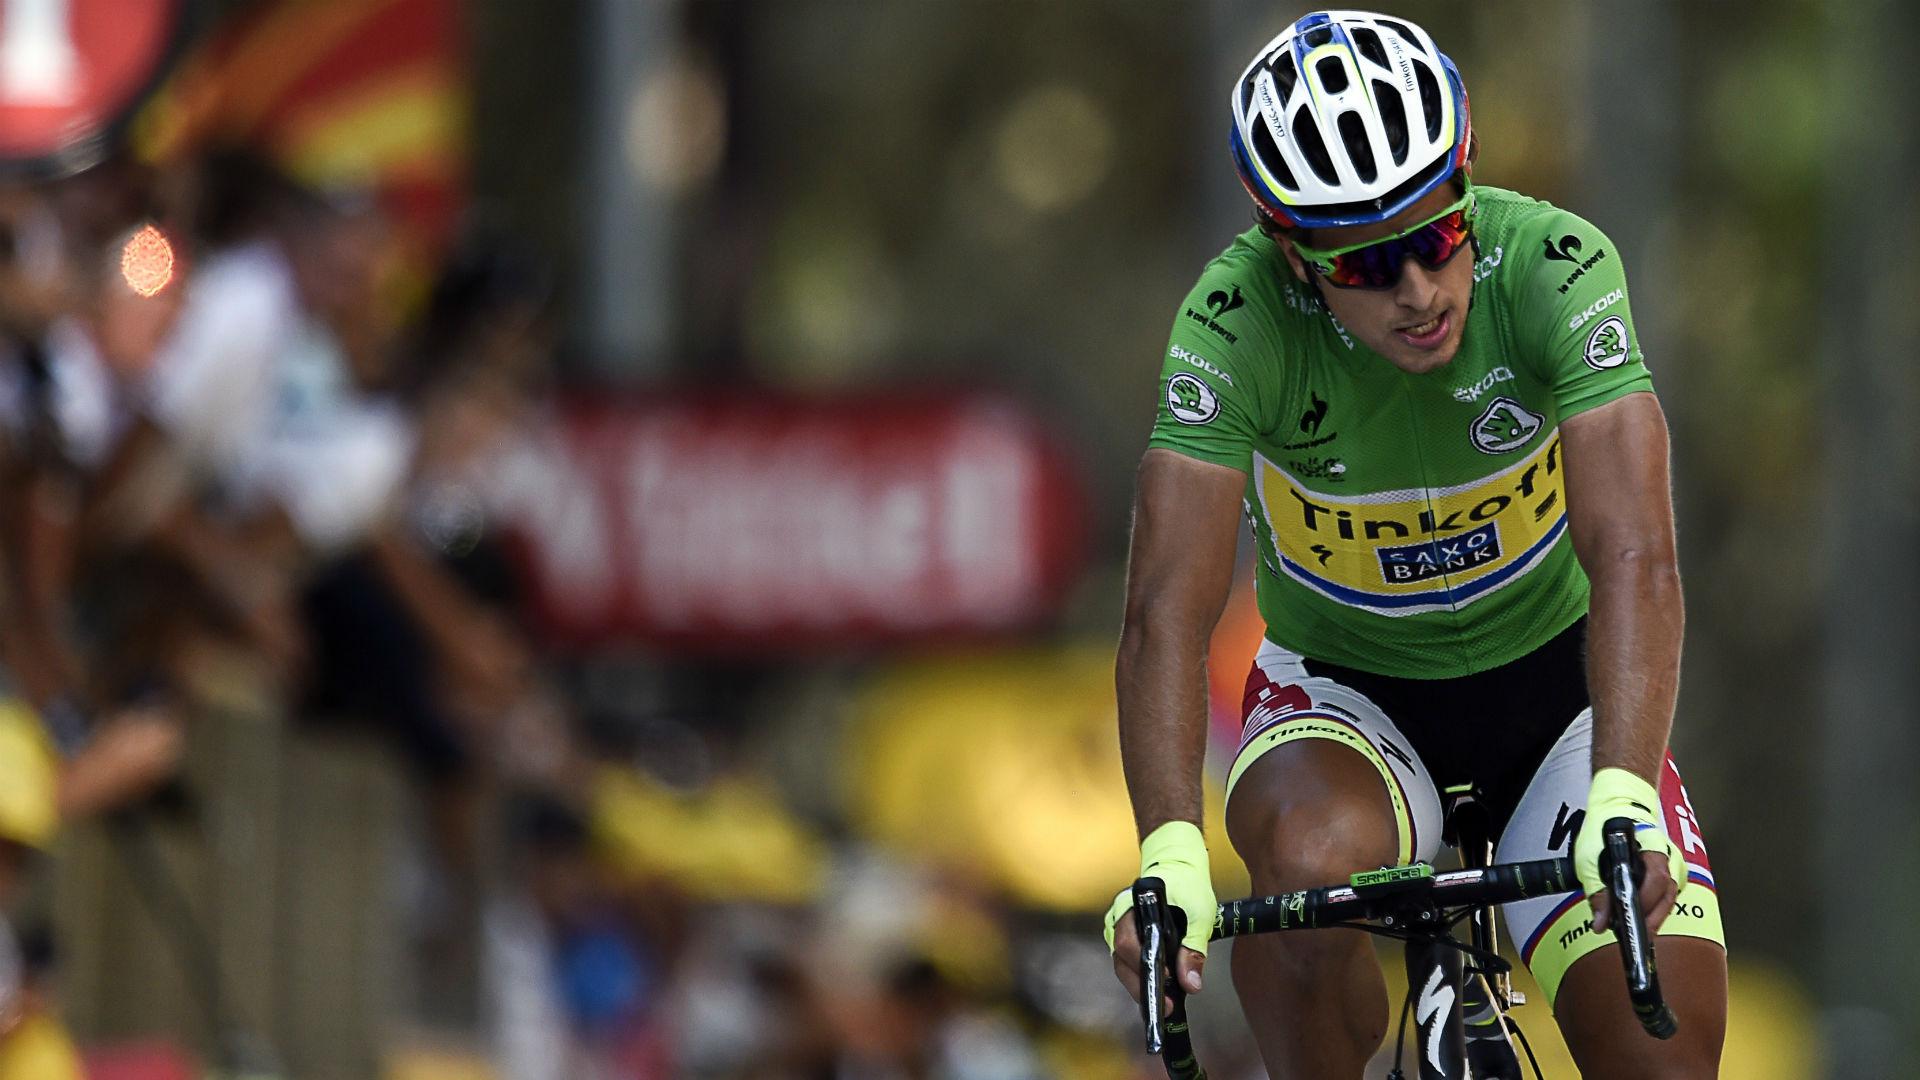 Tour de France stage win eludes Peter Sagan with another 2nd